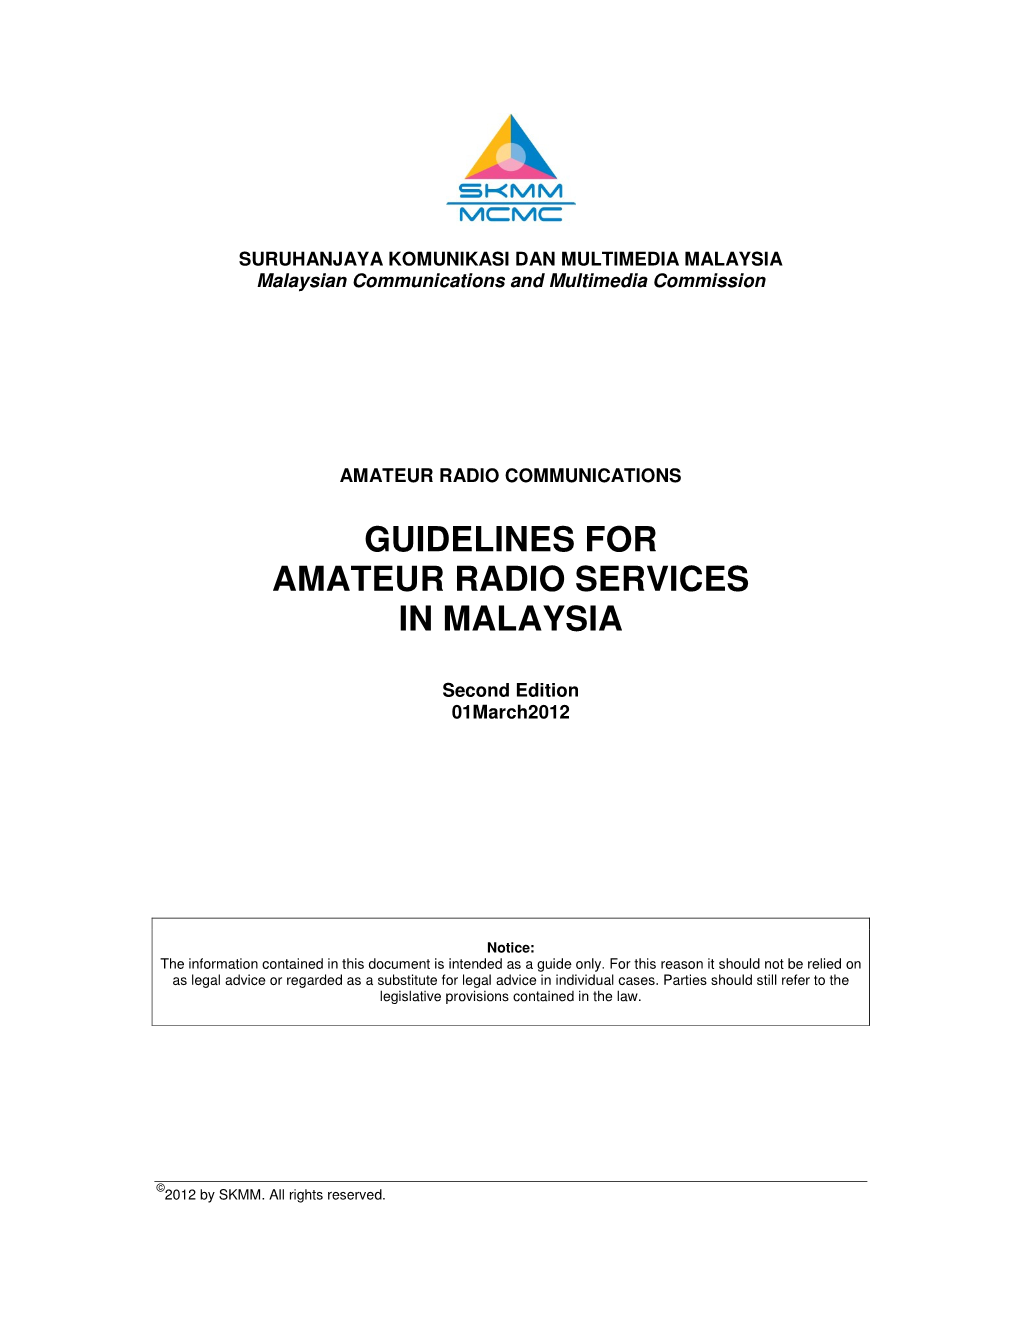 Guidelines for Amateur Radio Services in Malaysia